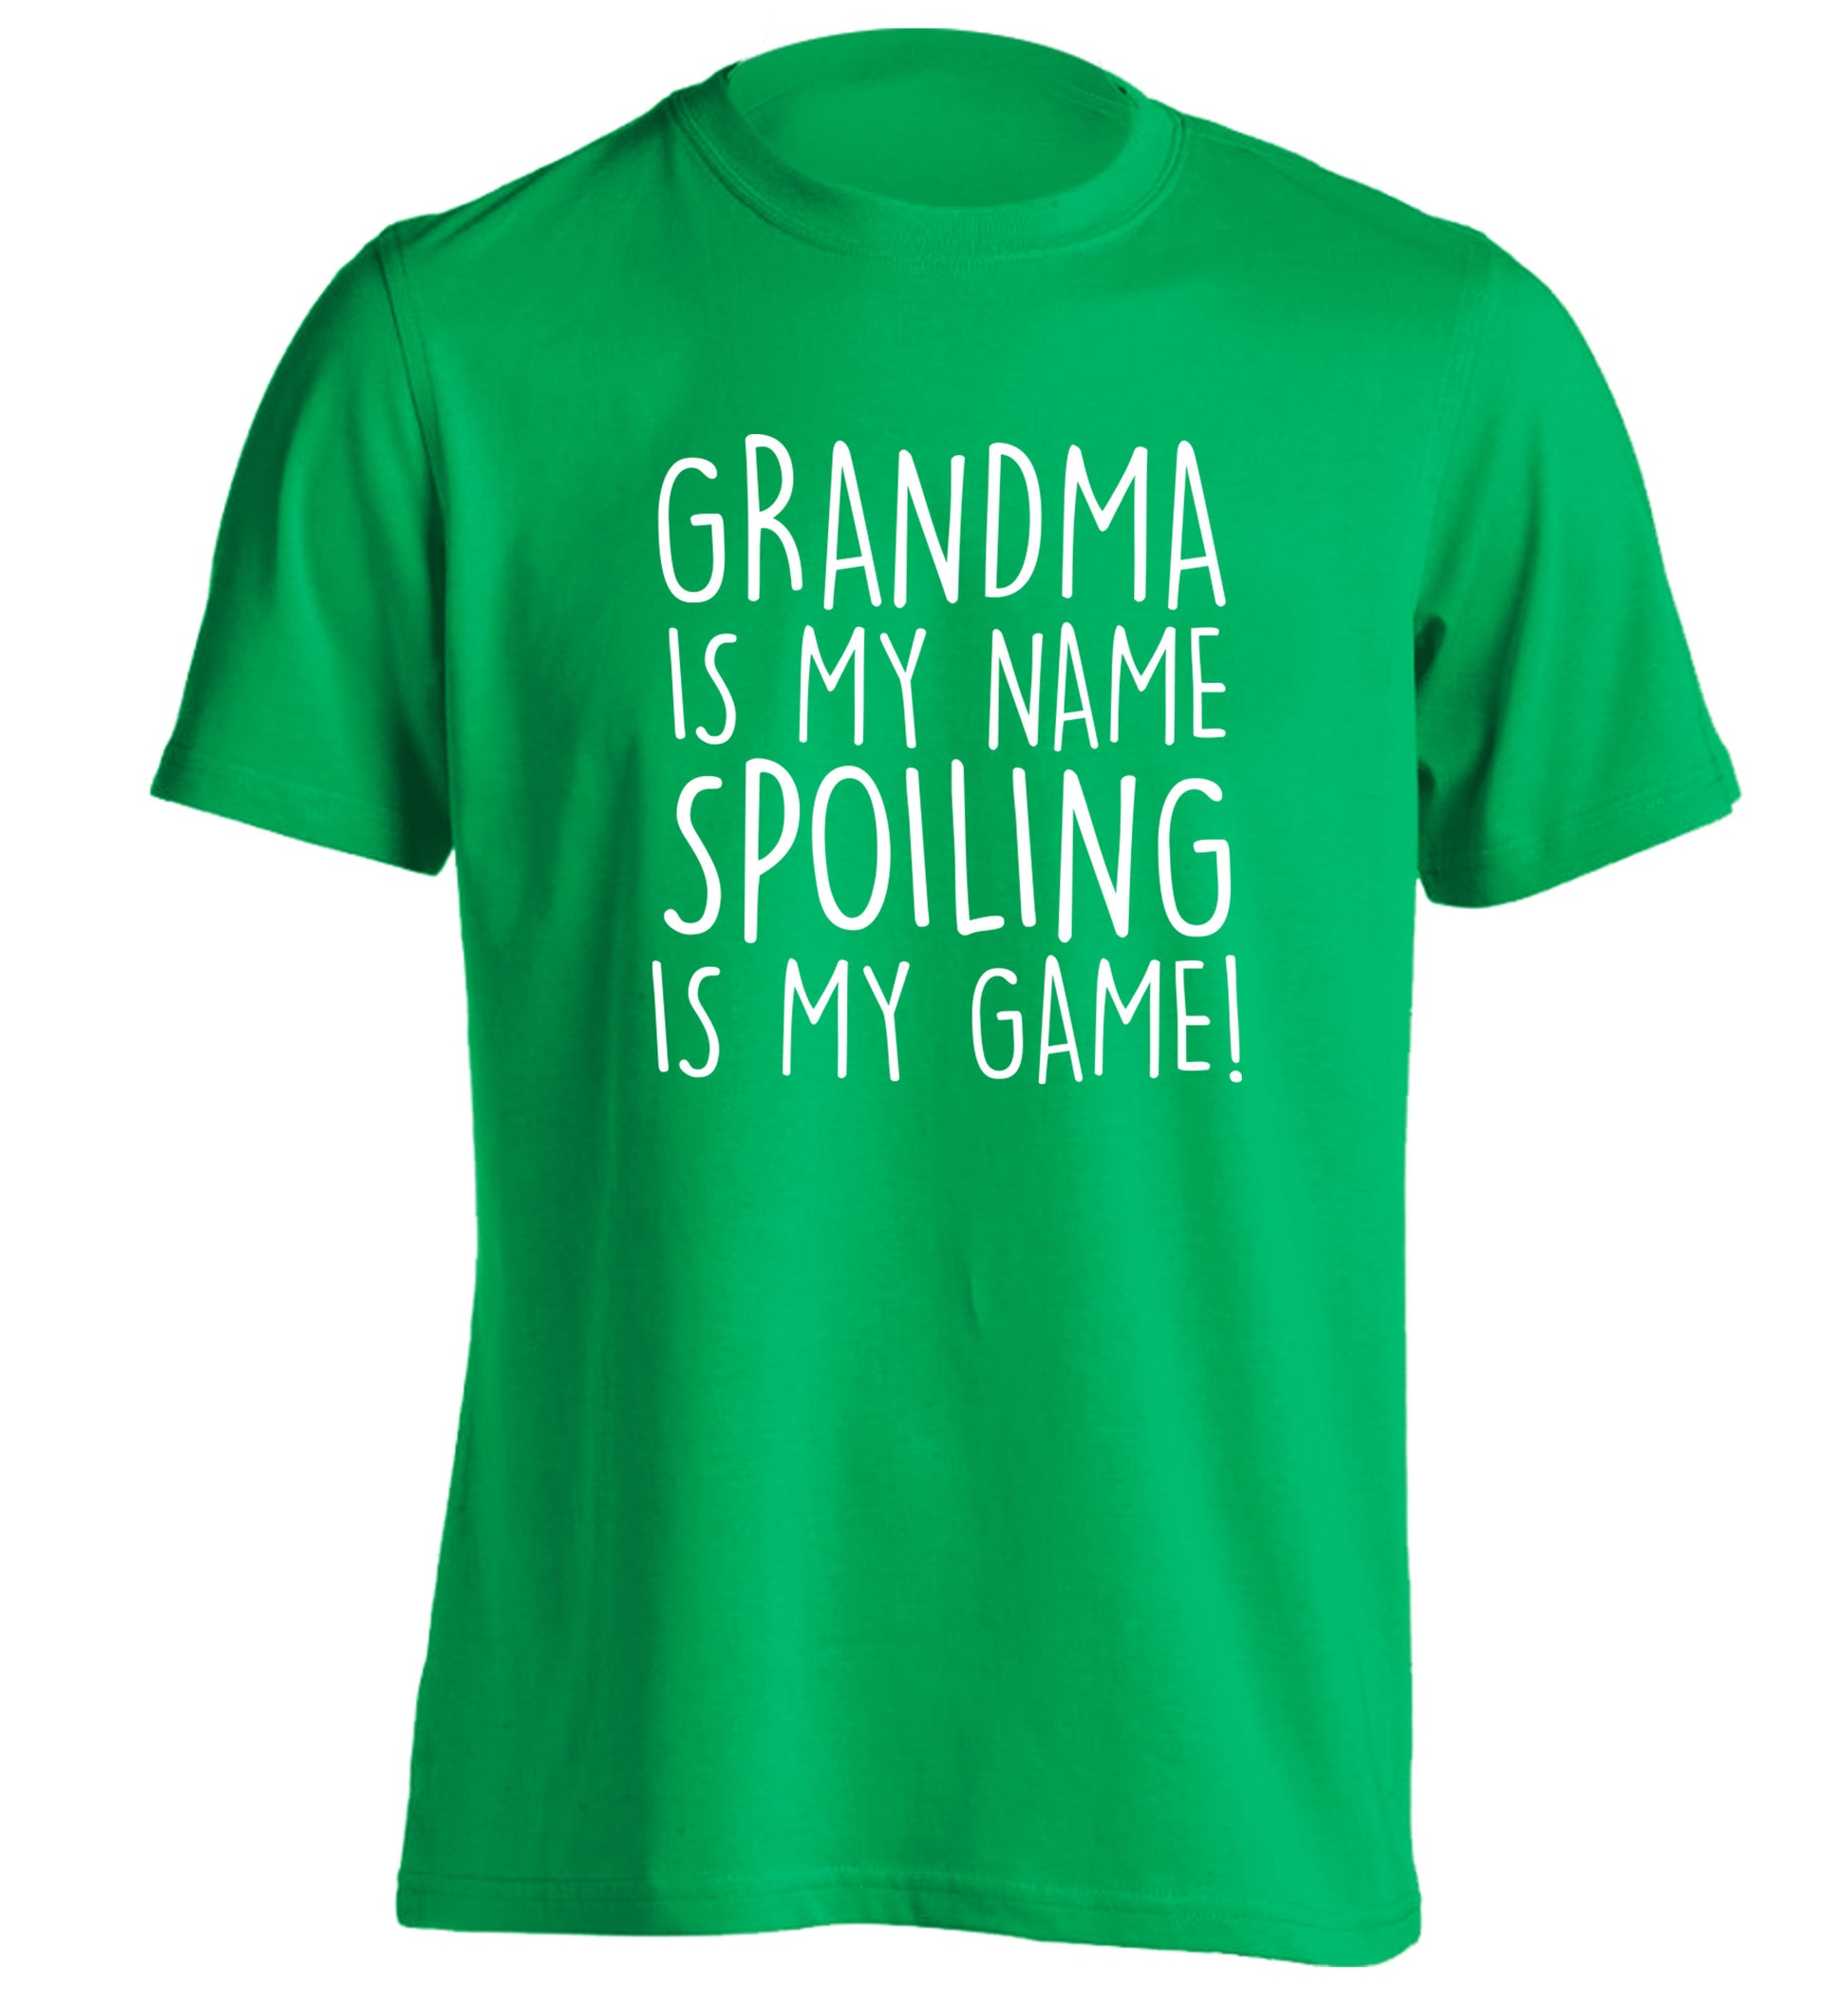 Grandma is my name, spoiling is my game adults unisex green Tshirt 2XL